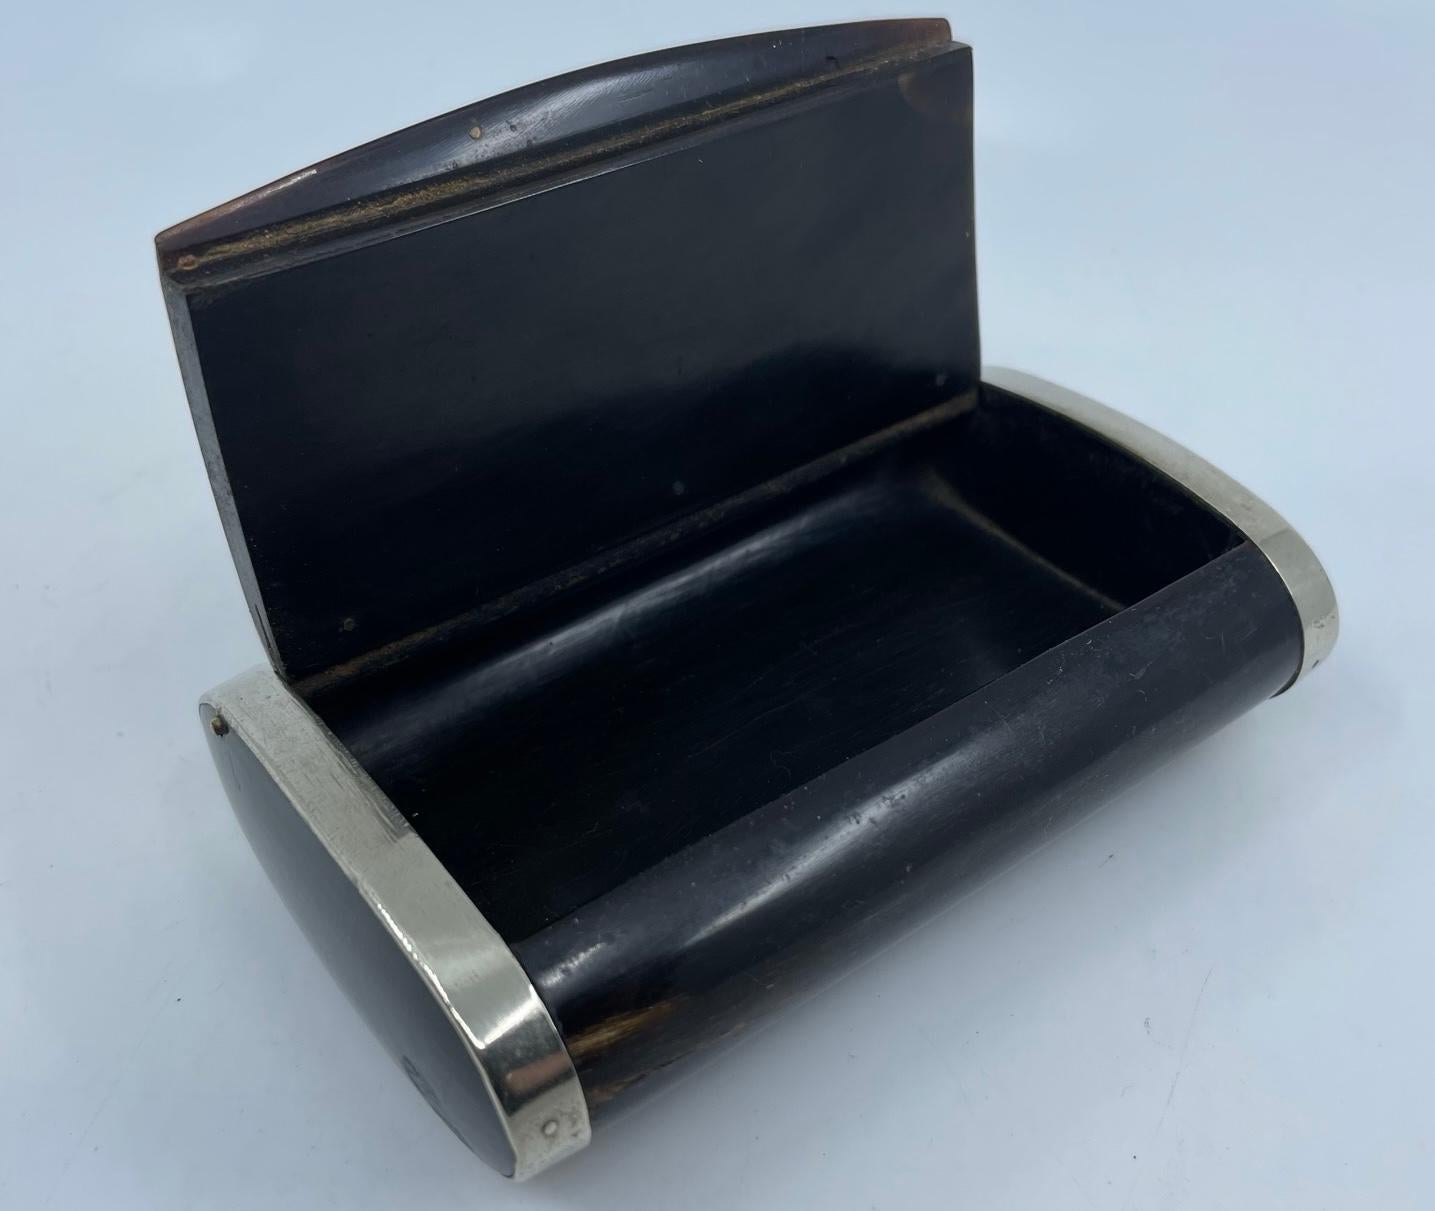 Sterling silver and bone box. Antique Continental dark bone/horn fitted case with sterling silver mounts and central oval for monogram; originally a tobacco and cigarette case. Handsome desk accessory. Europe, mid 19th century

Dimensions: 4.25” L